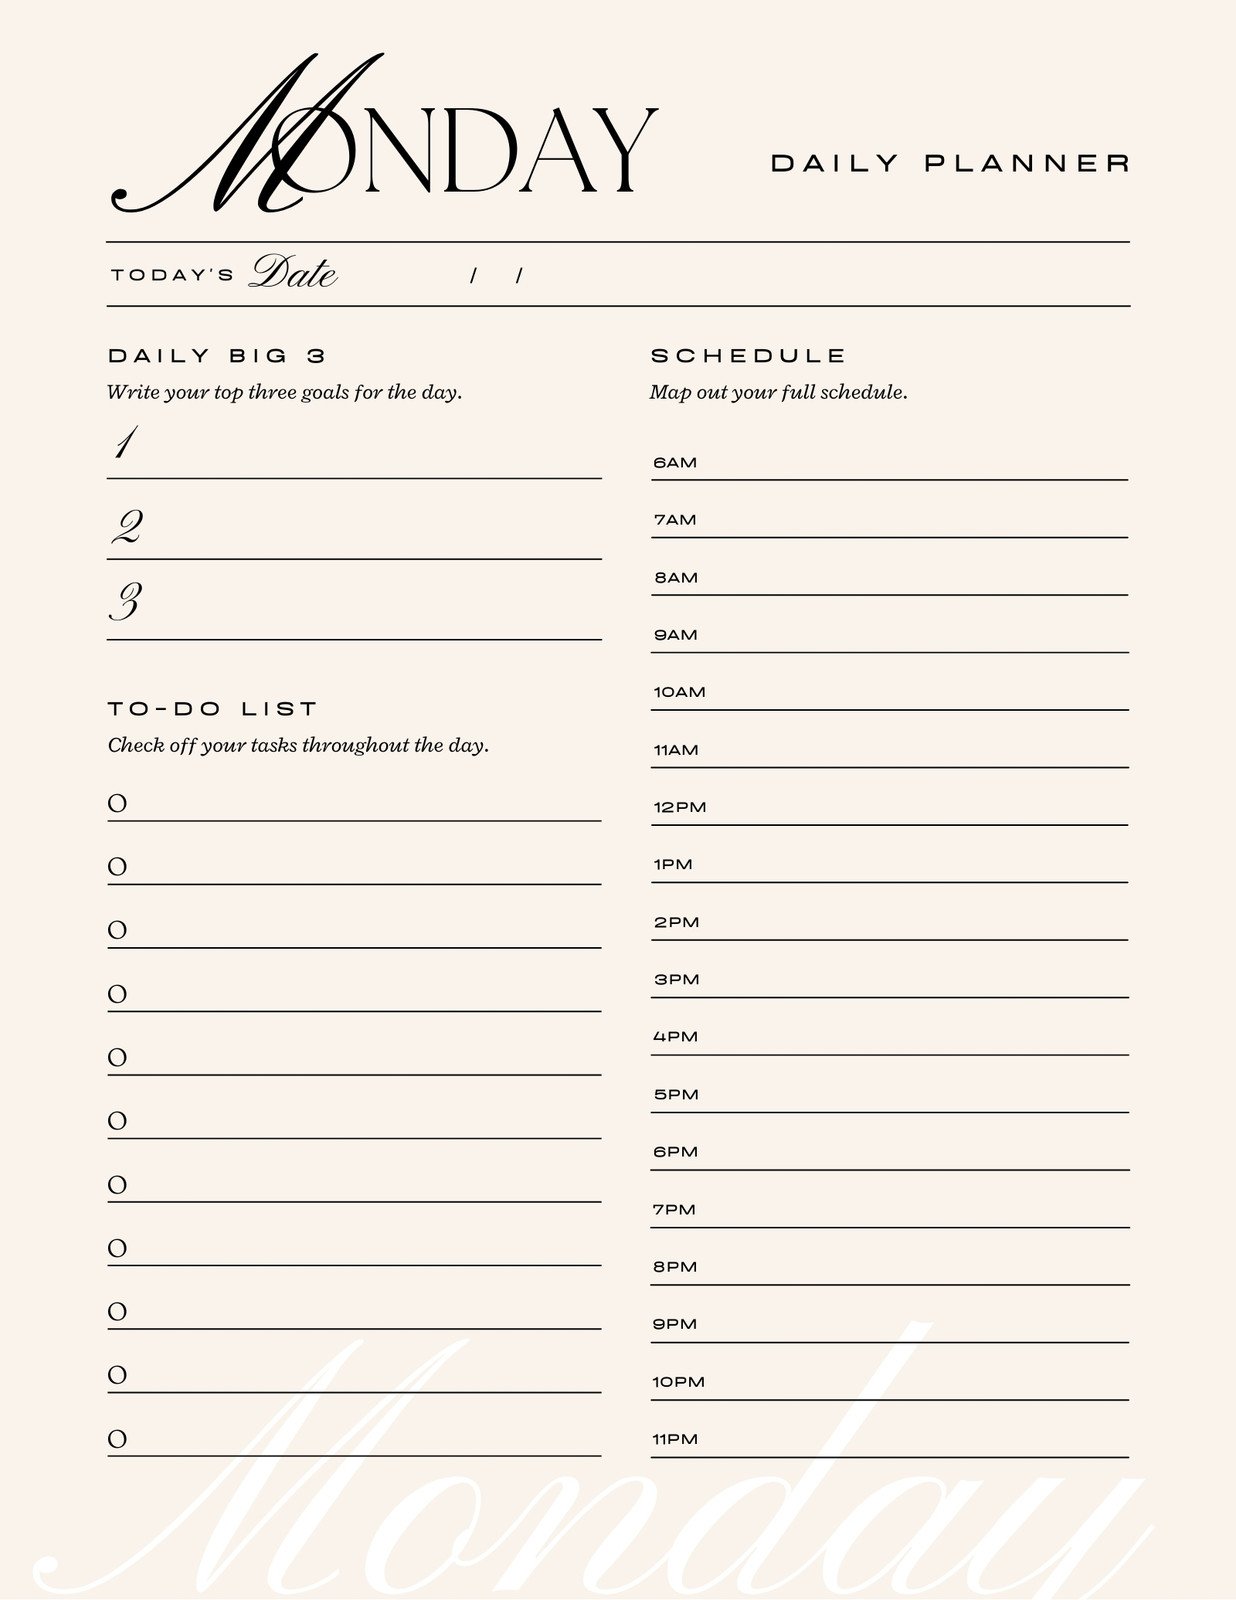 design-templates-stationery-daily-planner-editable-template-financial